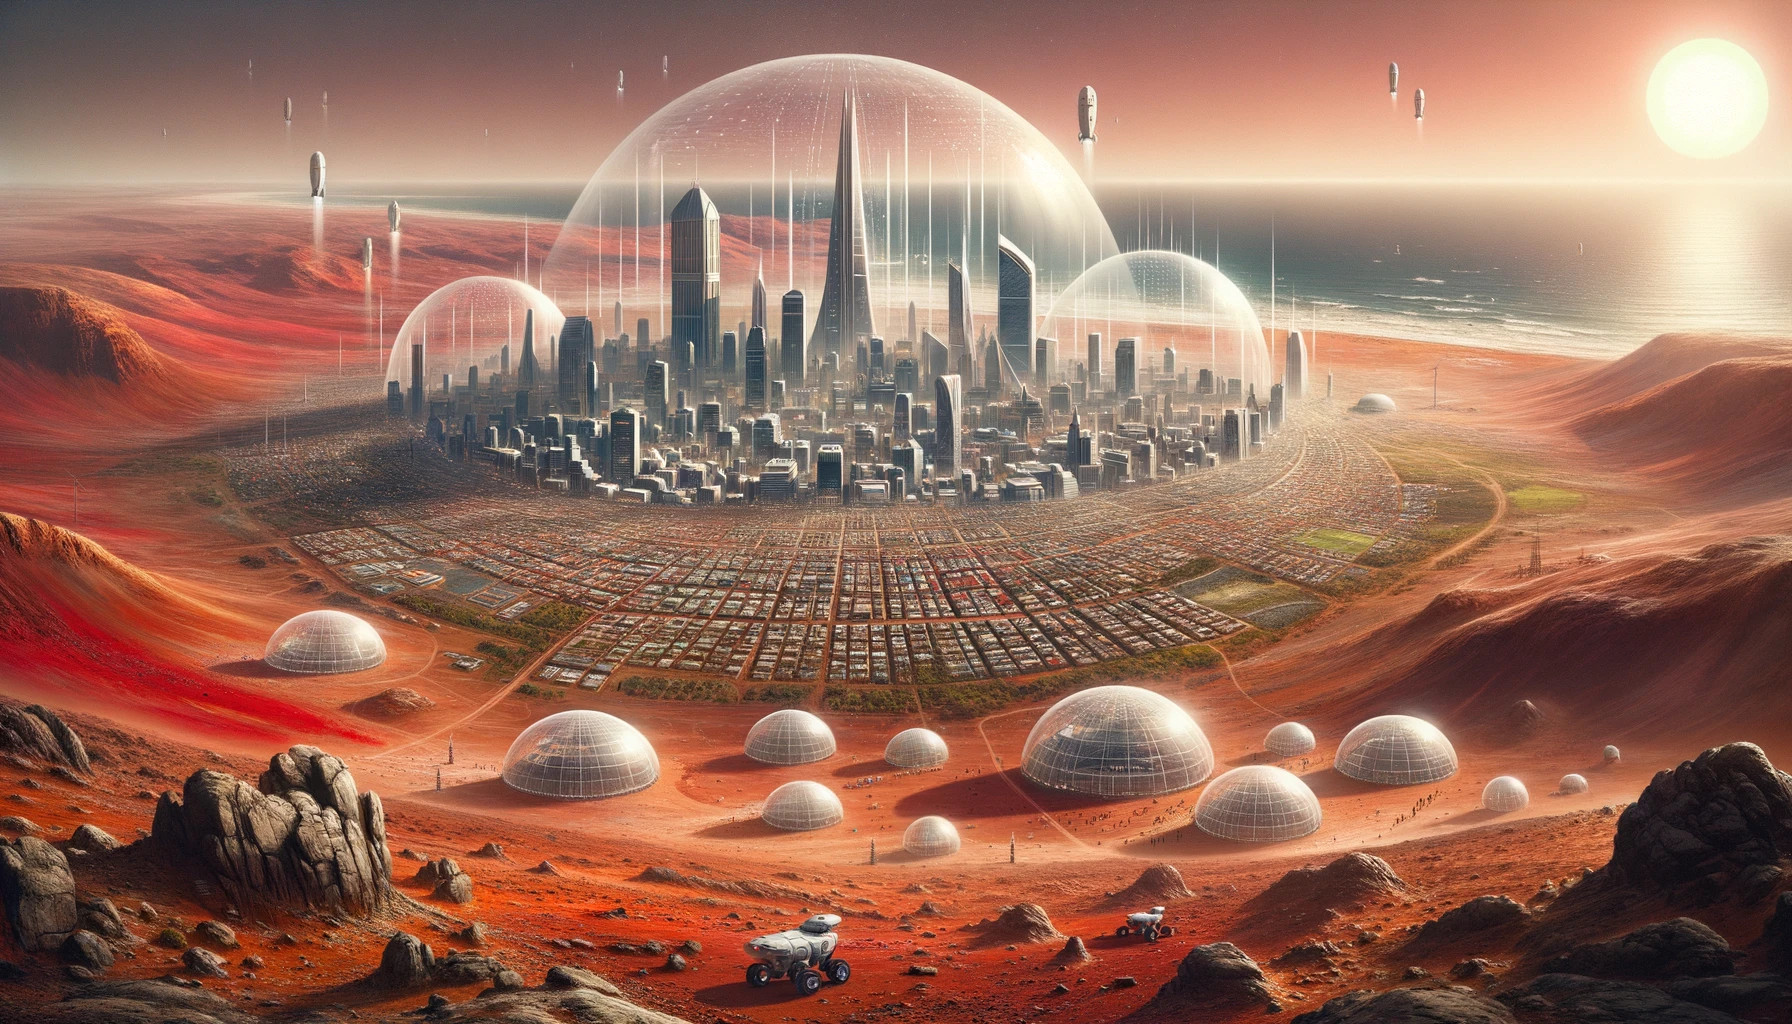 Futuristic landscape painting of Cape Town on Mars. The city&rsquo;s skyline rises from the Martian surface, with its iconic landmarks protected by large transparent shields. Martian rovers and settlers can be seen, and the vast red desert of Mars extends to the horizon.